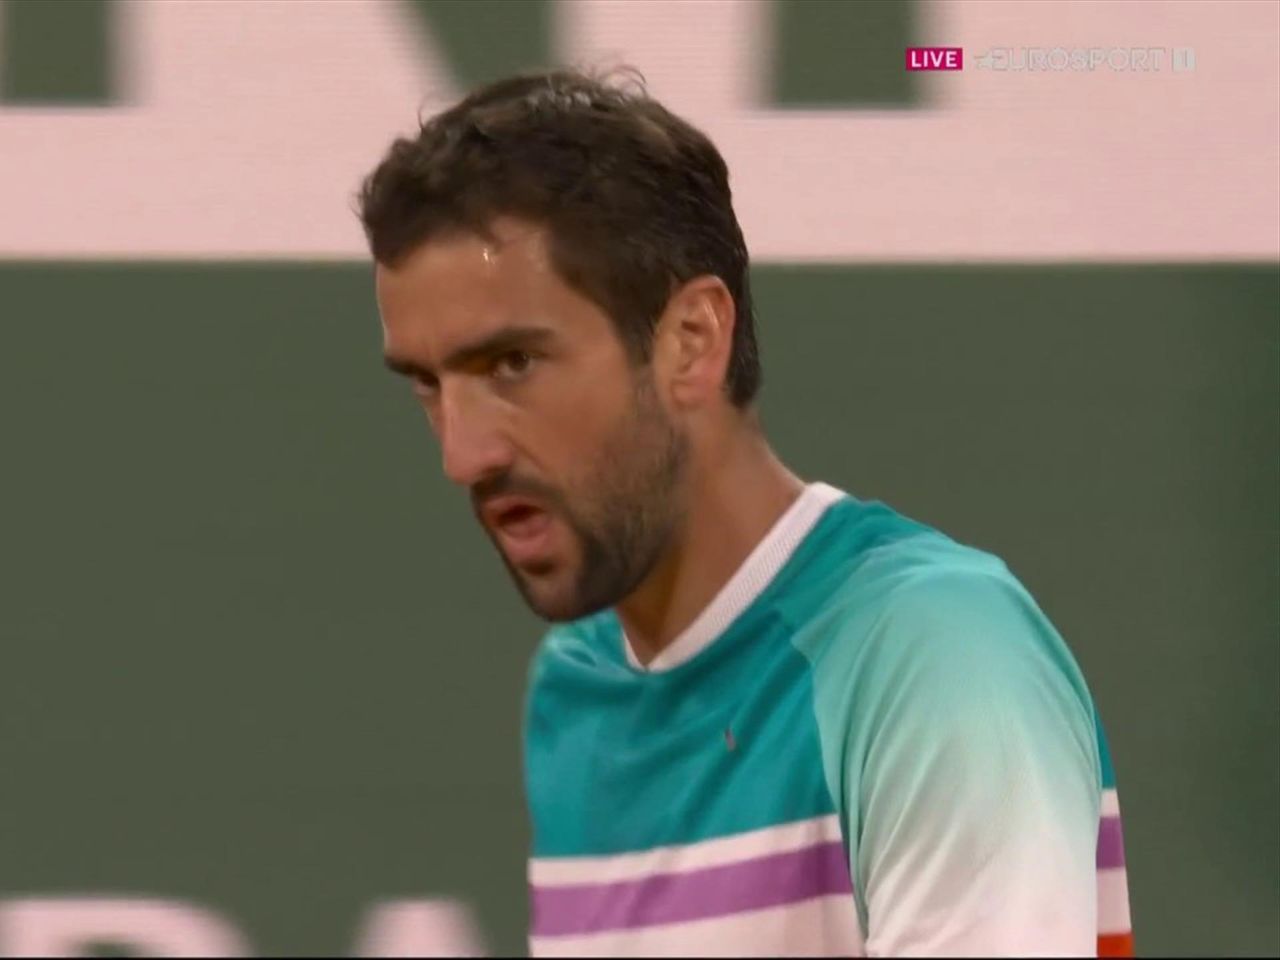 French Open 2022 - Wow! - Marin Cilic wins first set after Daniil Medvedev double faults - Tennis video